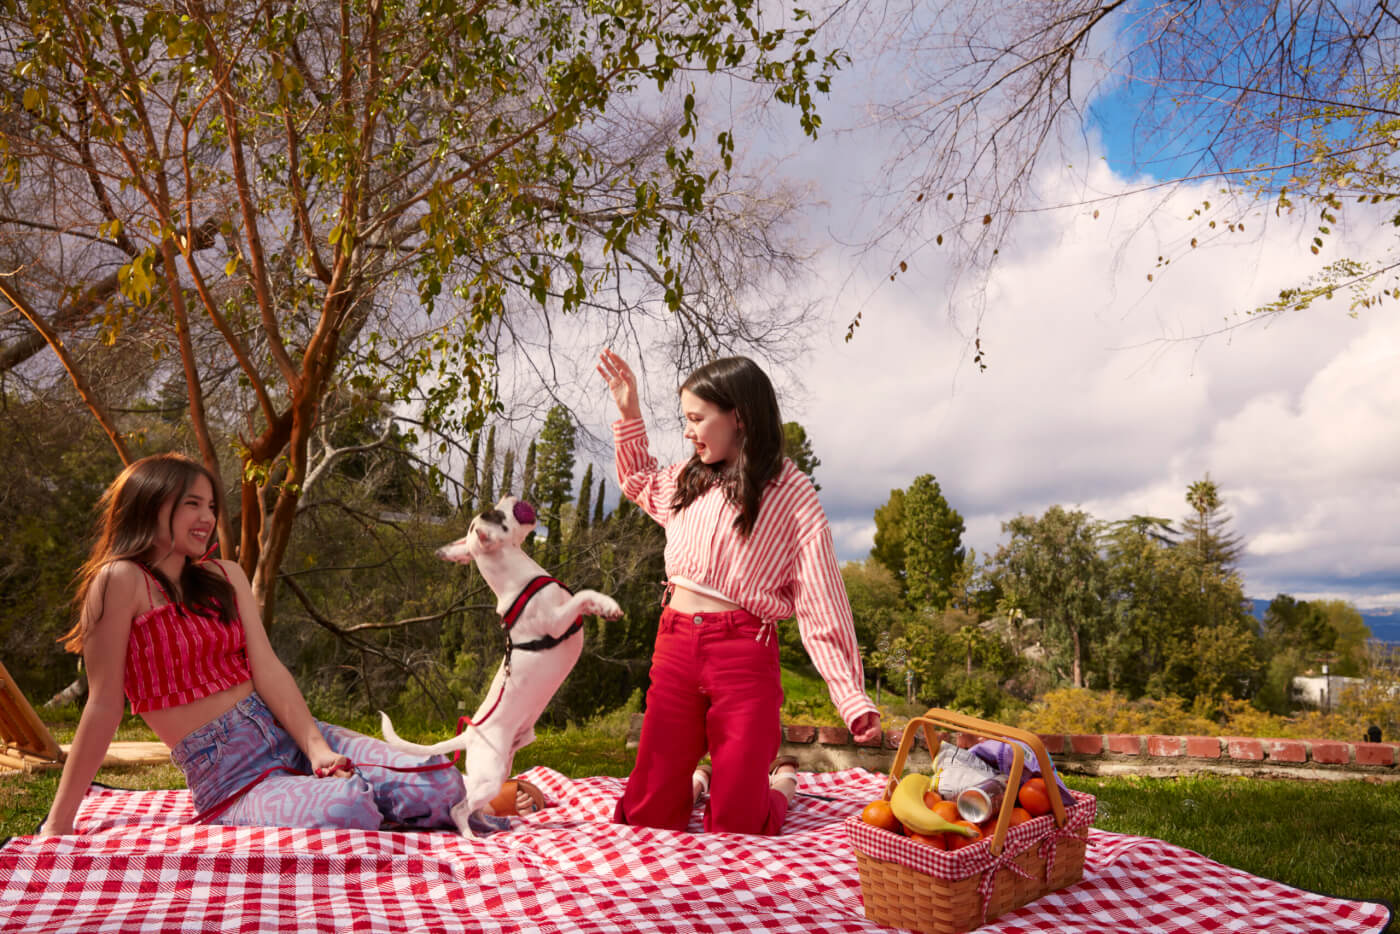 Sisters Violet and Madeleine McGraw sit outsite on a red checkered picnic blanket playing with their dog Rudy